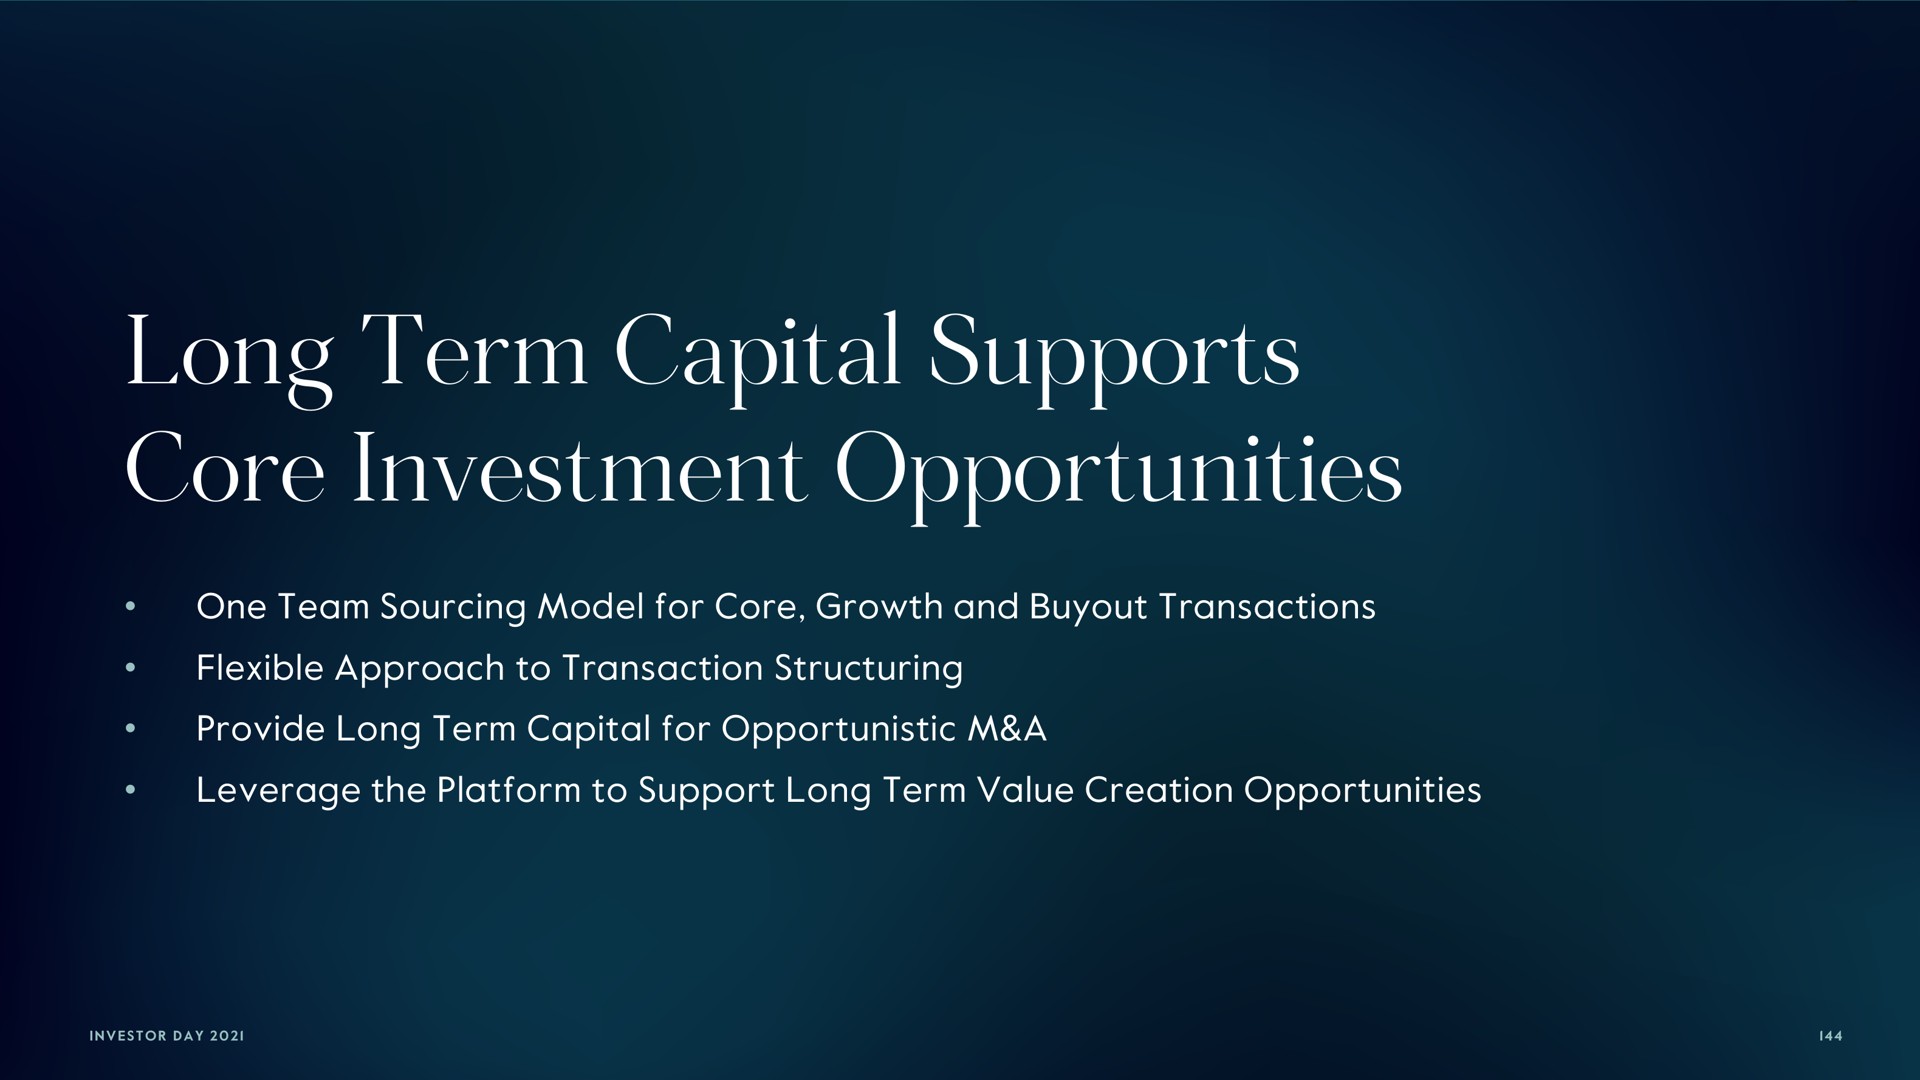 long term capital supports core investment opportunities | Carlyle